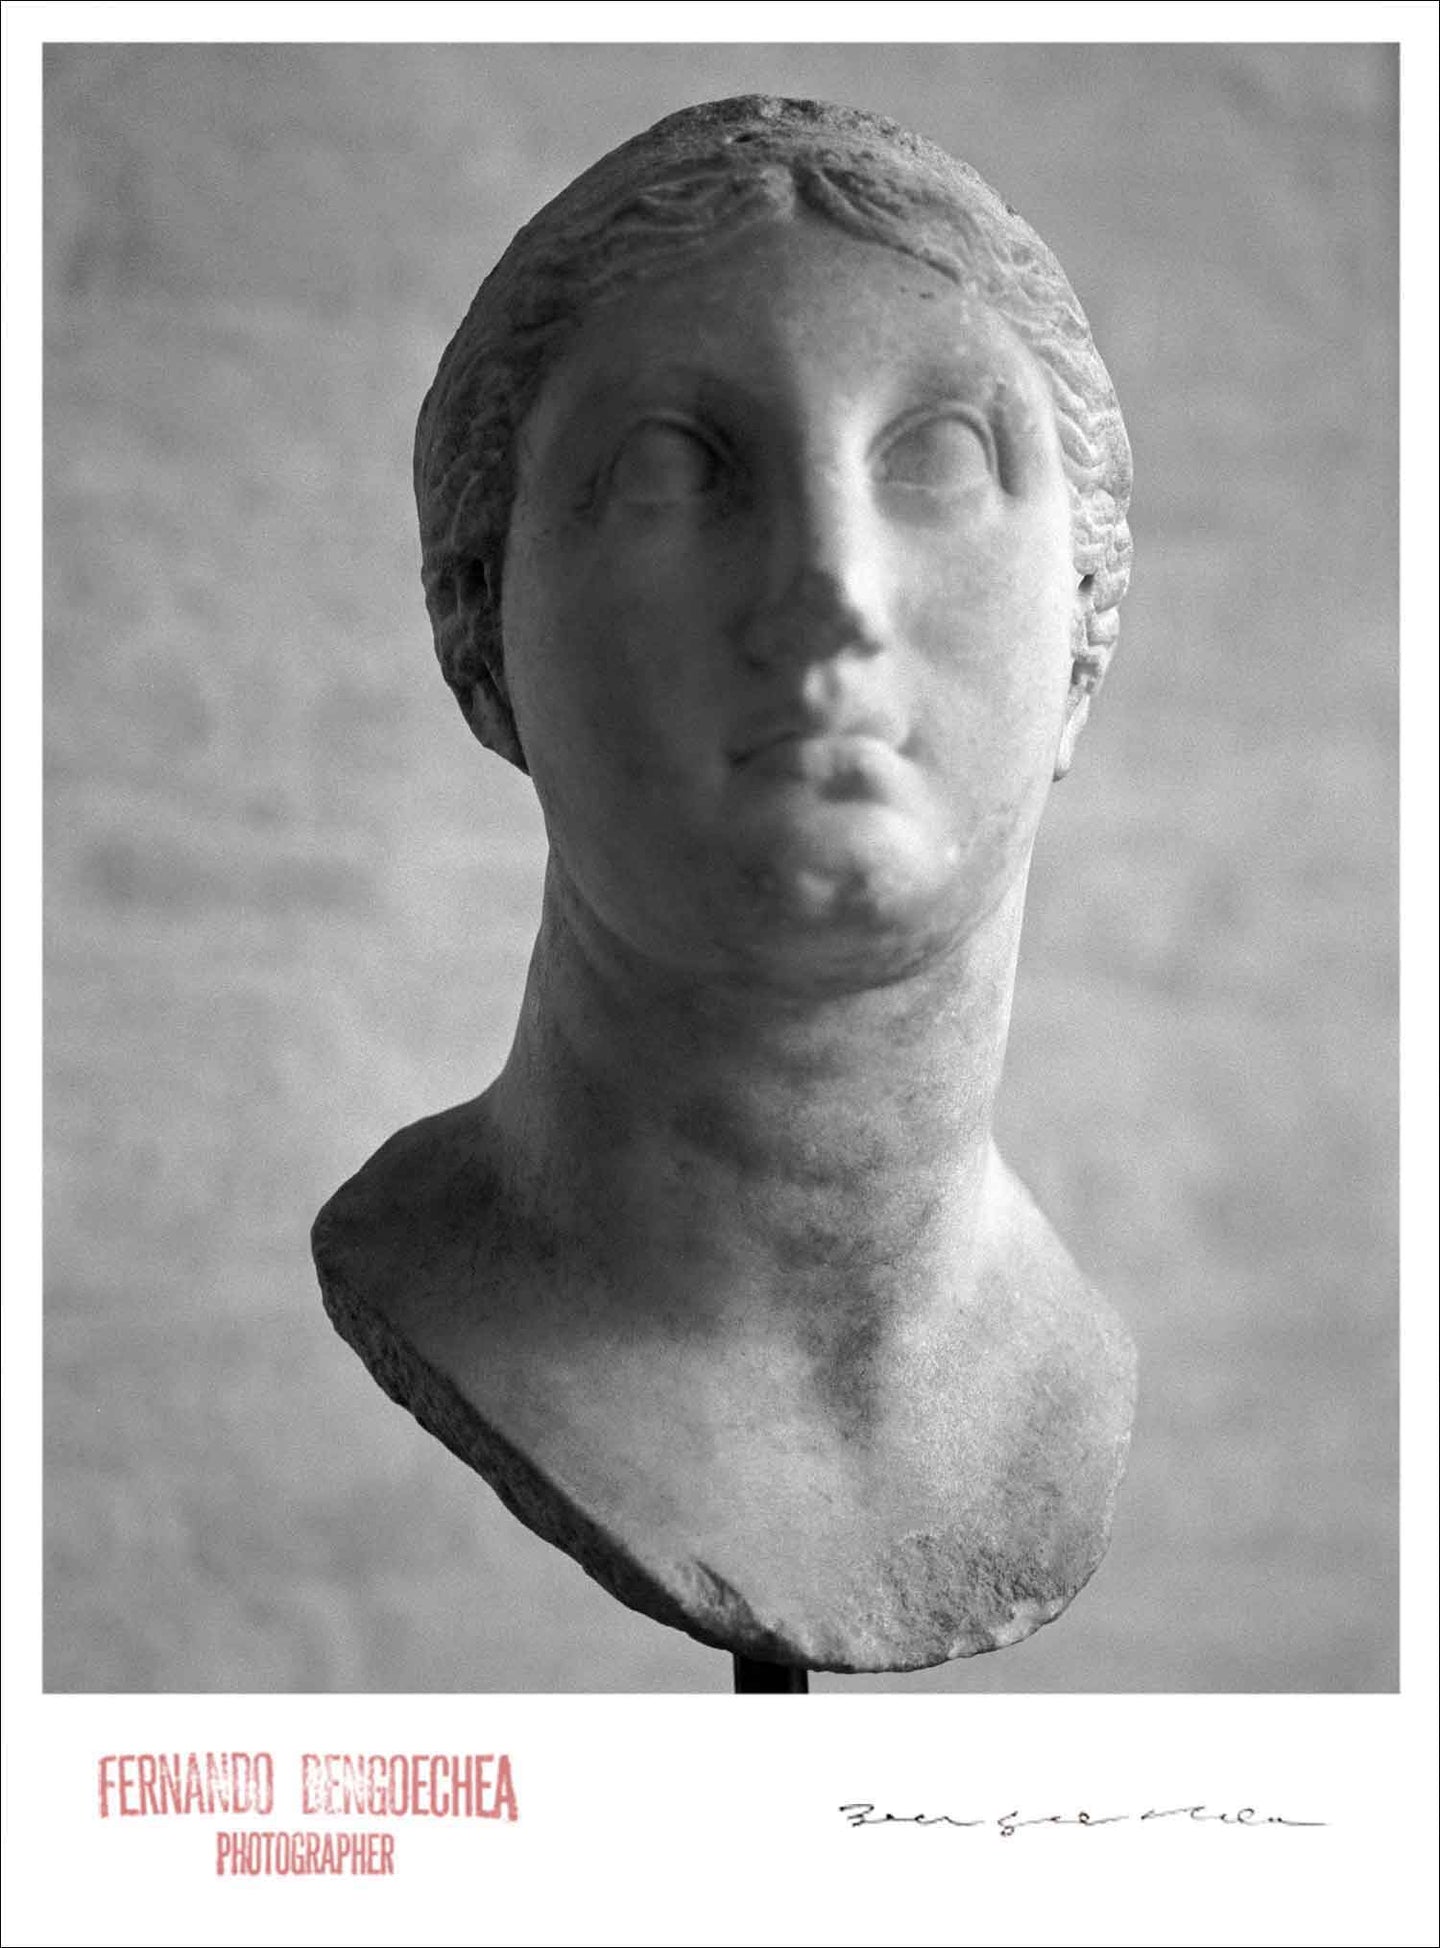 BUST # 14 - Giclee Print - Stamped and Signed